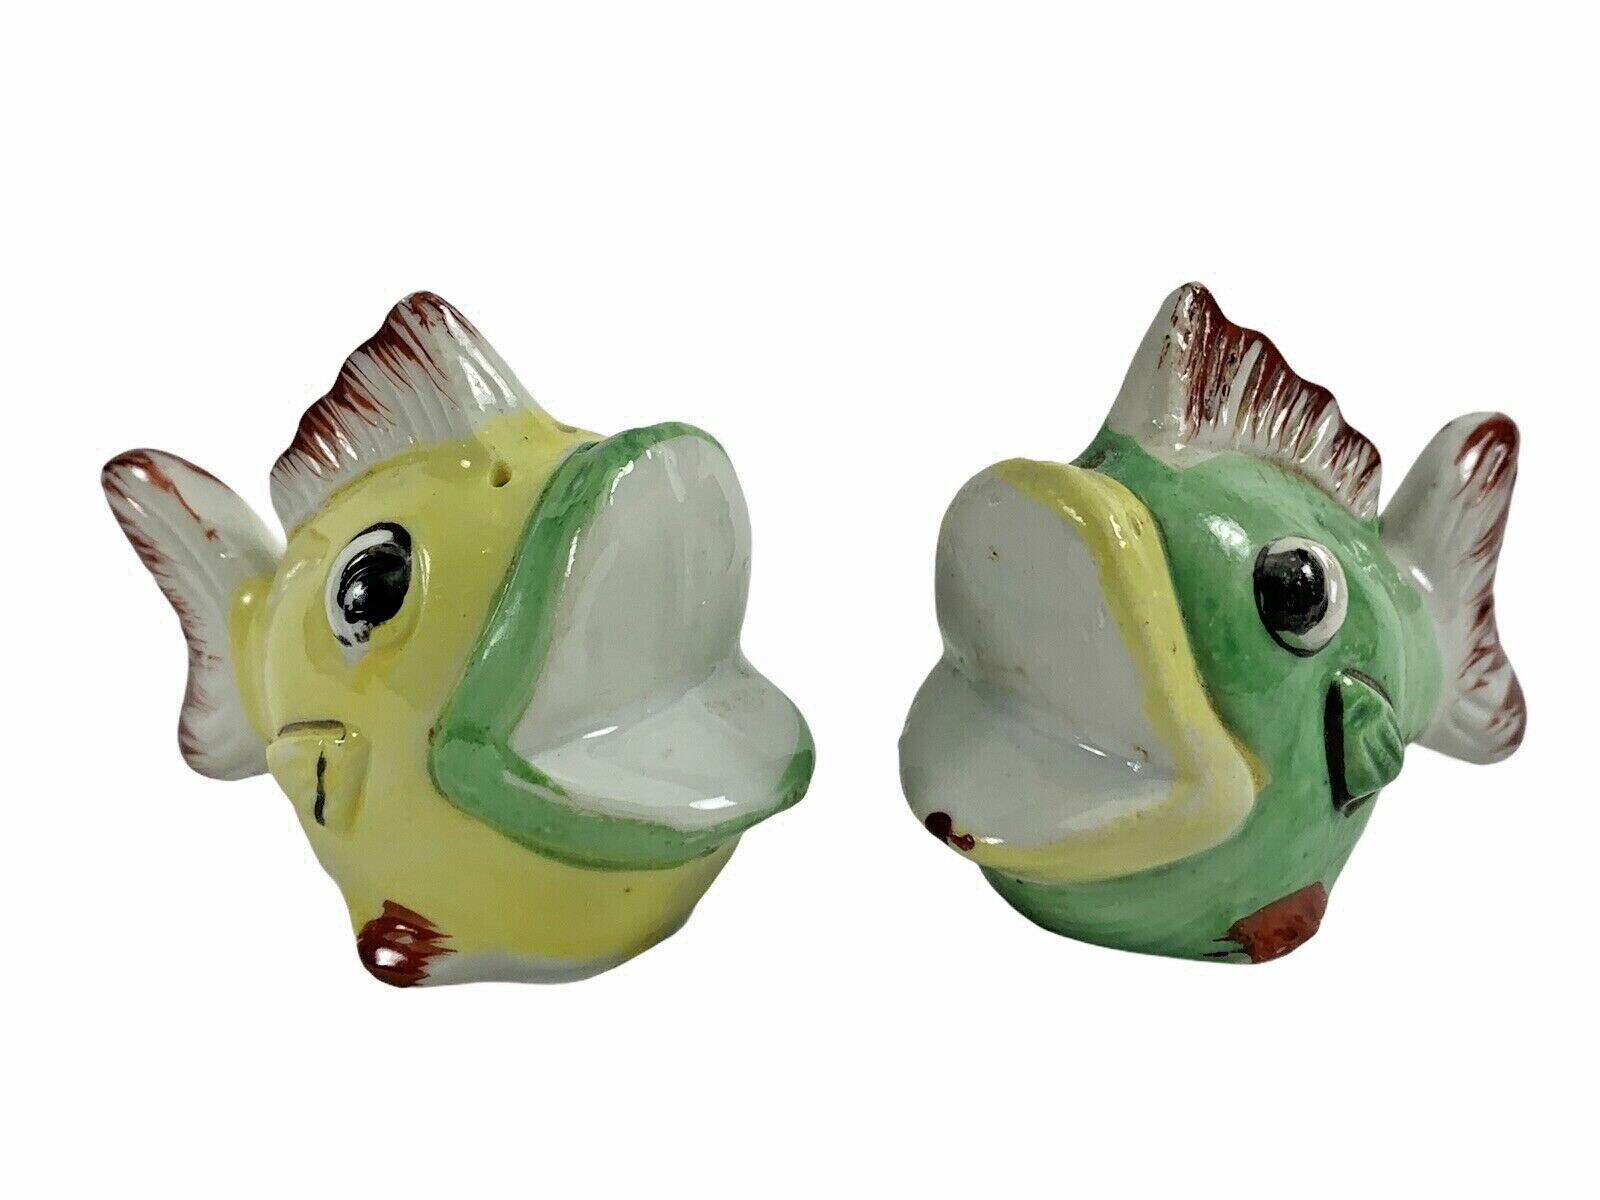 Vintage Anthropomorphic Fish Kissing Big Mouth Salt and Pepper Shakers Japan 